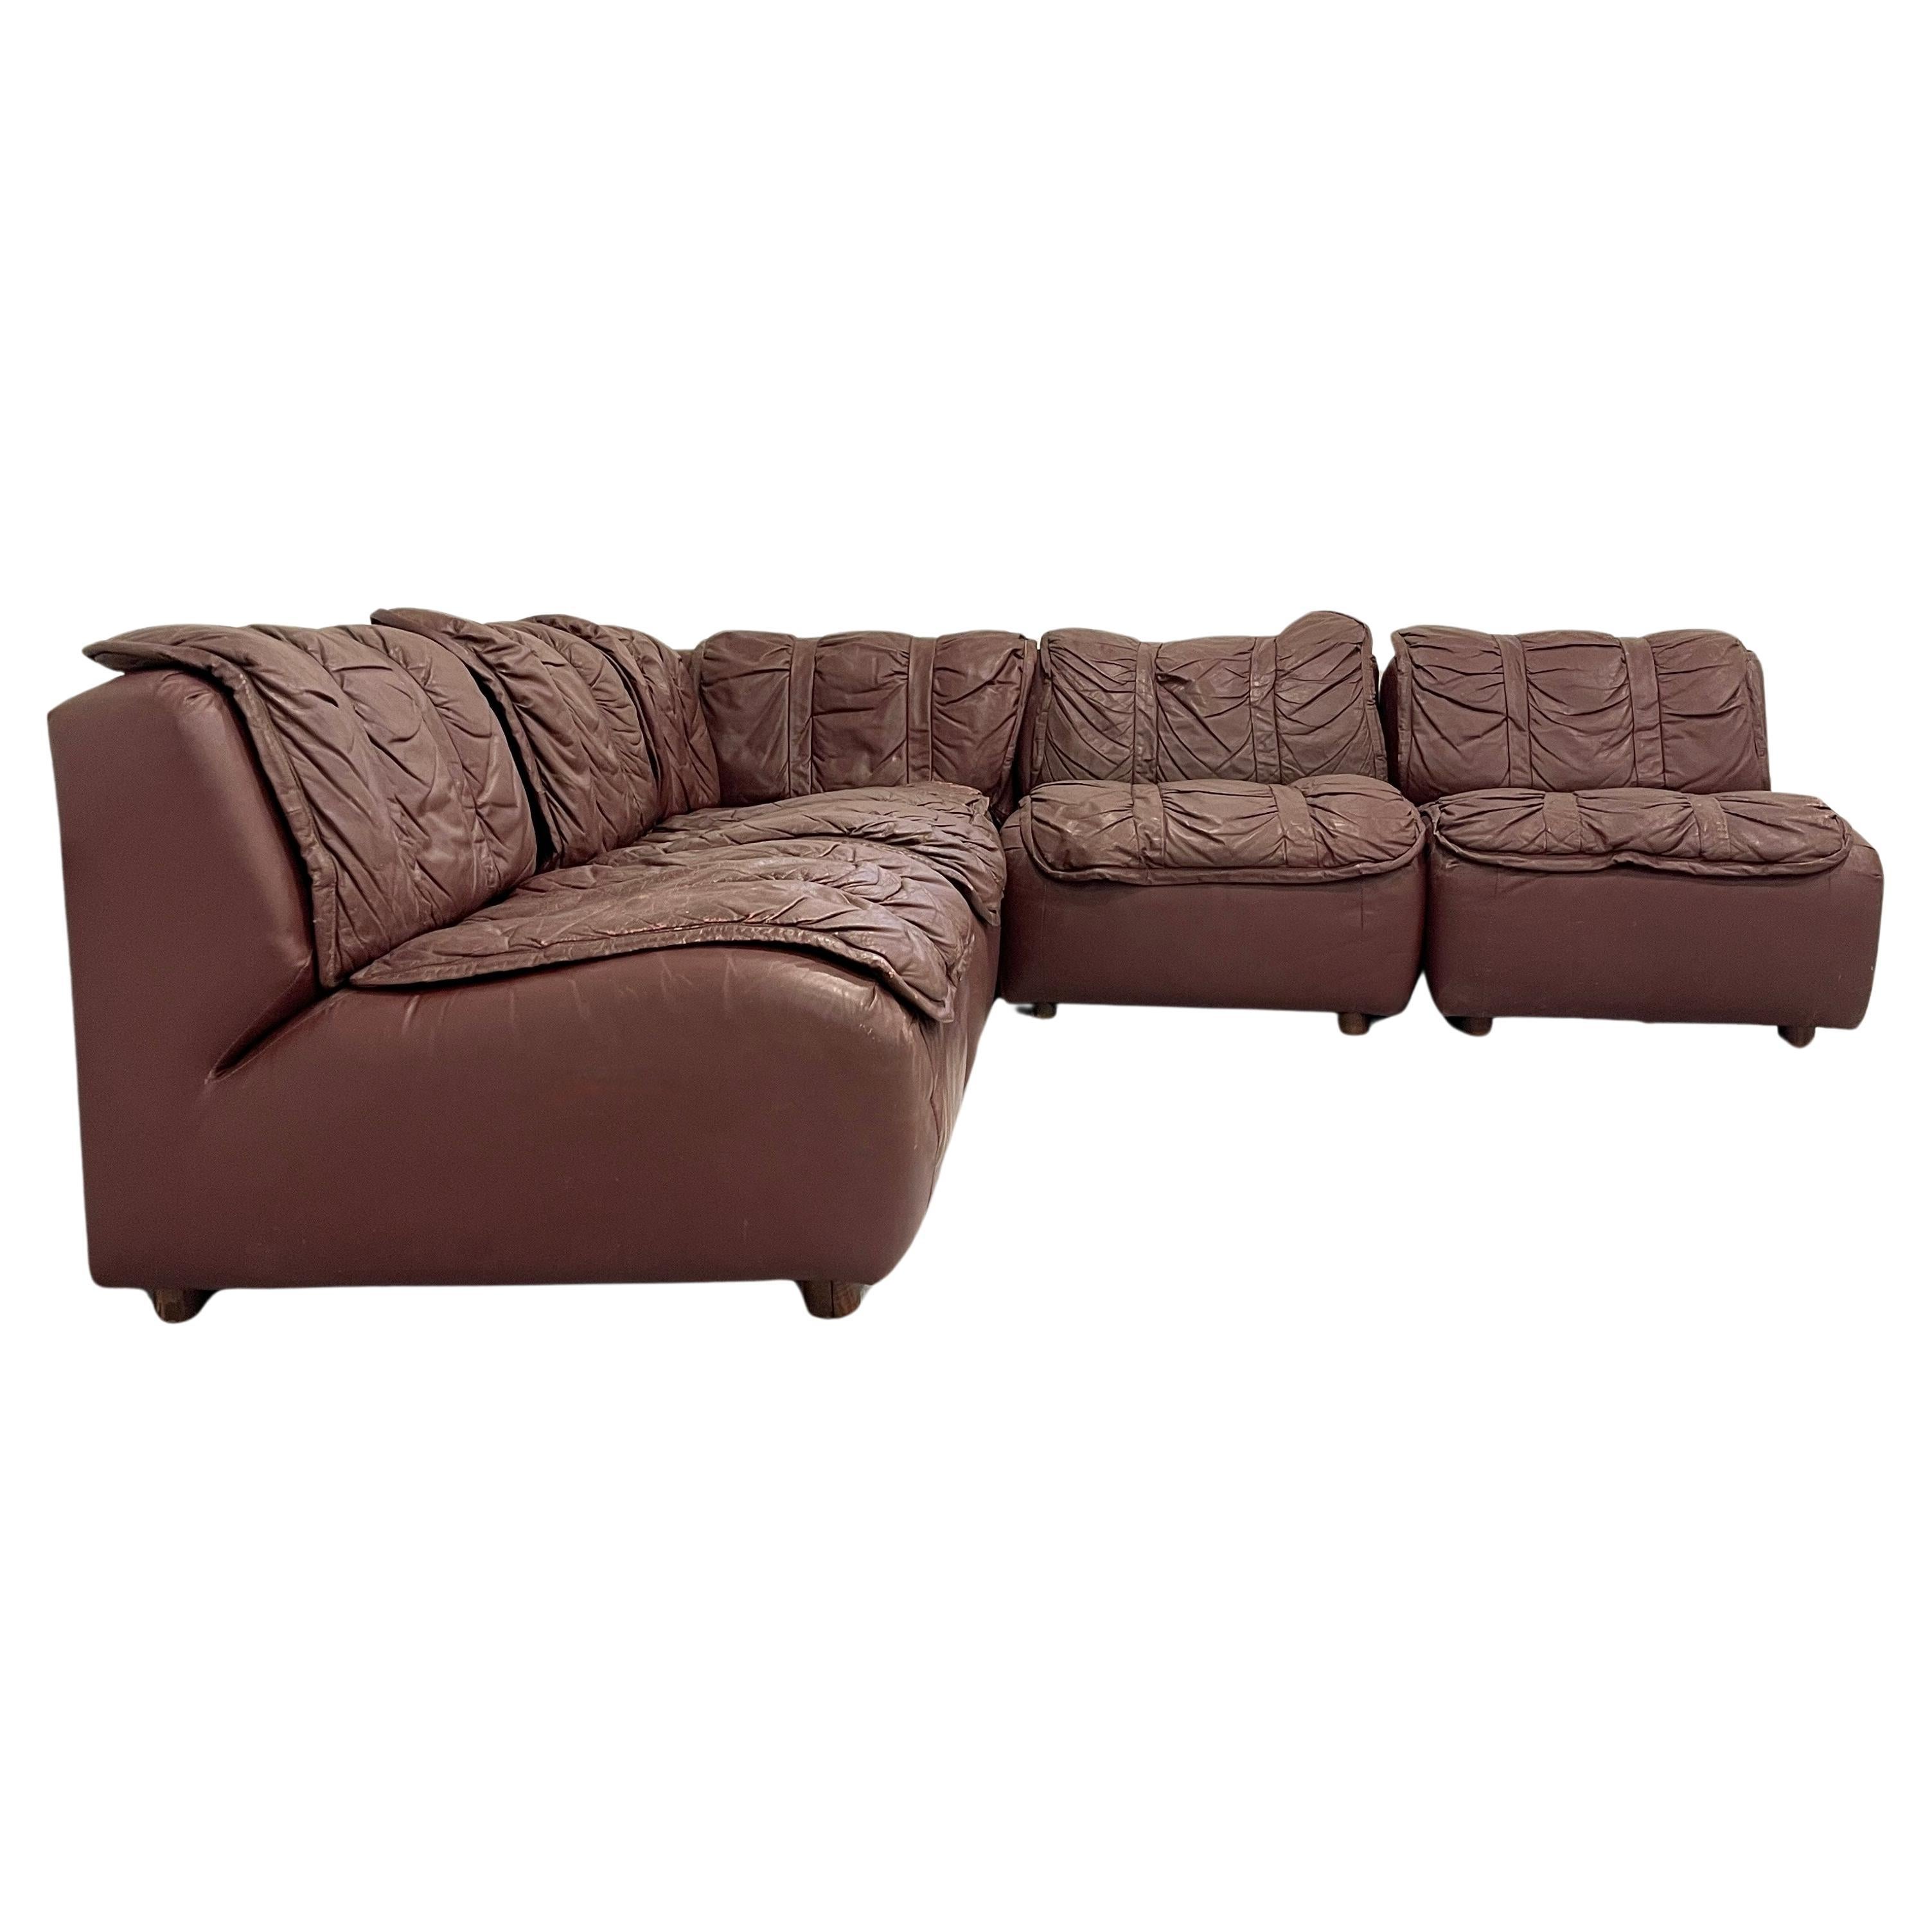 Beautiful perfectly patinated leather sectional from the 1970s.  Very comfortable and can be configured and moved in a number of different ways. Very solid sectional in a deep chocolate brown leather. Each piece can stand alone as a chair as well.